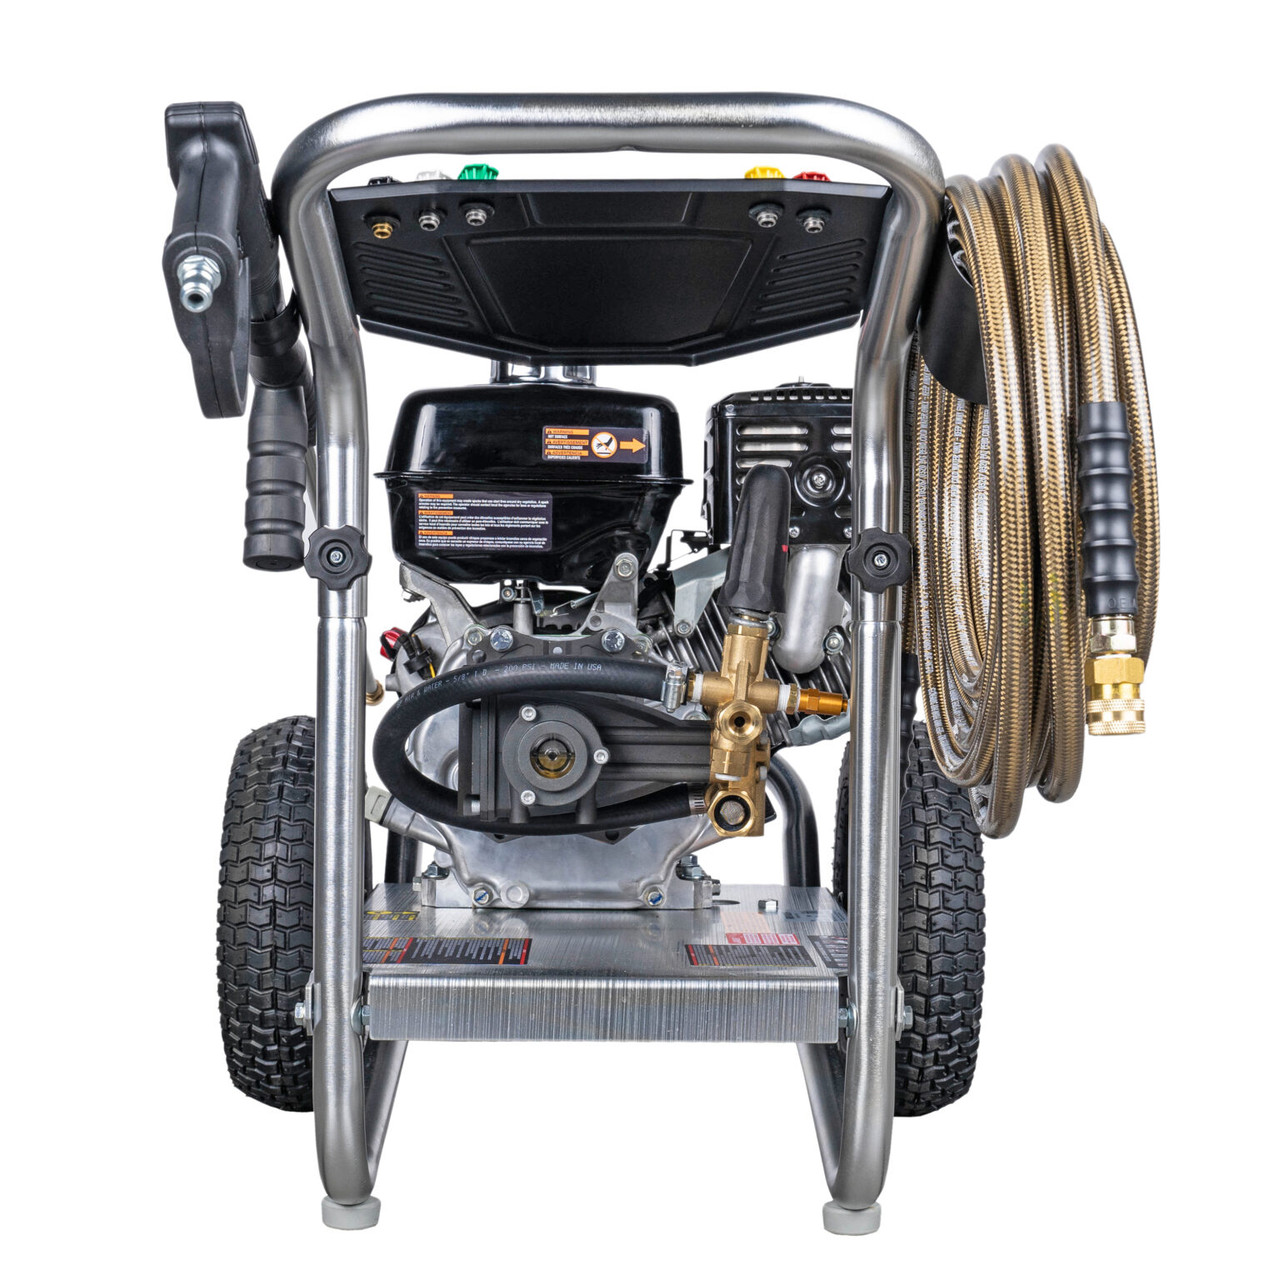 3500 PSI at 4.0 GPM HONDA GX270 with AAA Triplex Plunger Pump Cold Water Gas Professional Pressure Washer IS61026